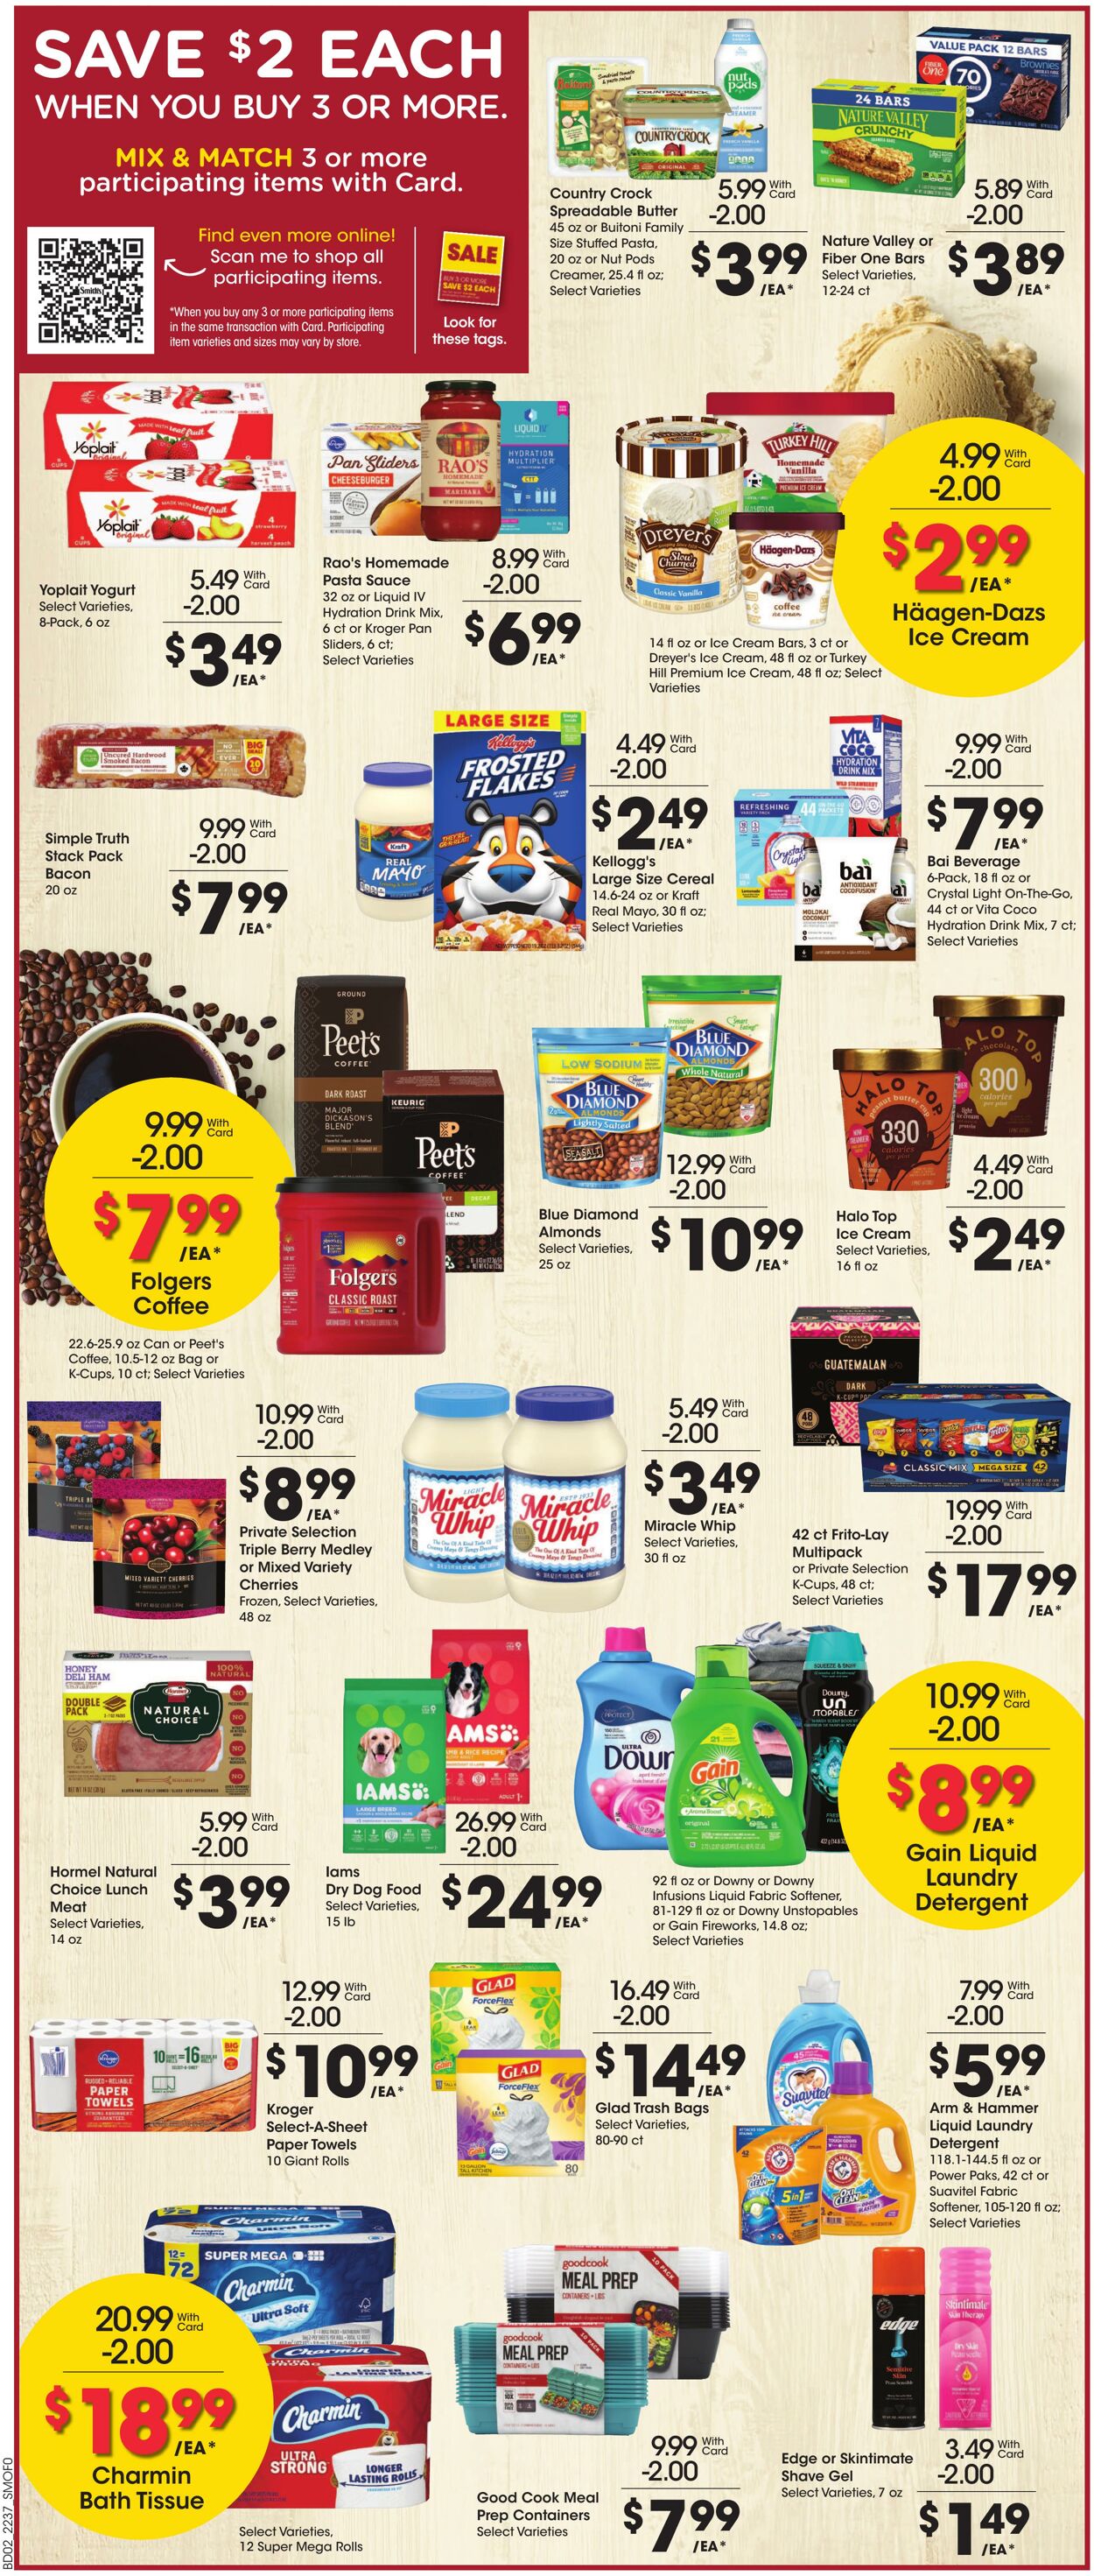 Weekly ad Smith’s Food and Drug 10/12/2022 - 10/18/2022